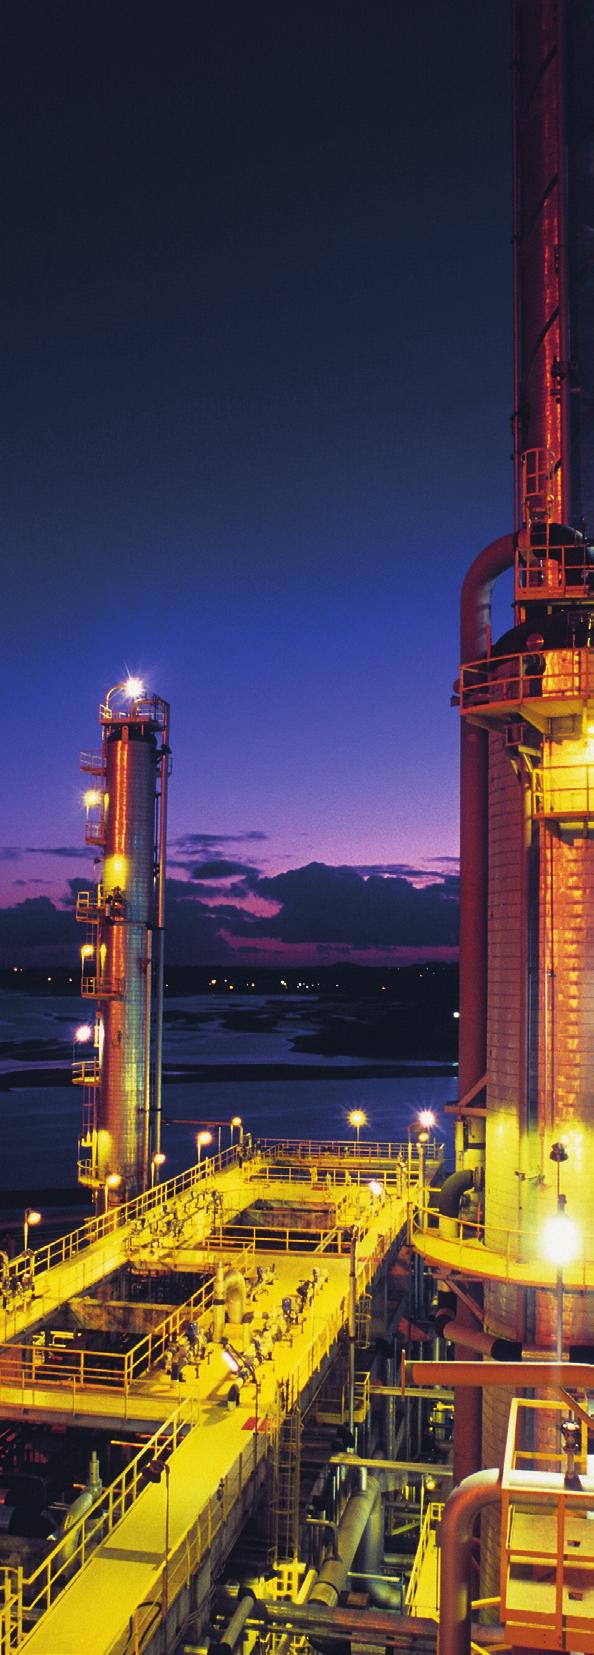 Babcock & Wilcox (B&W) is a leading supplier of turnaround and capital project services for customers in a wide variety of industries, including oil and gas refining, petrochemical, electric utility,